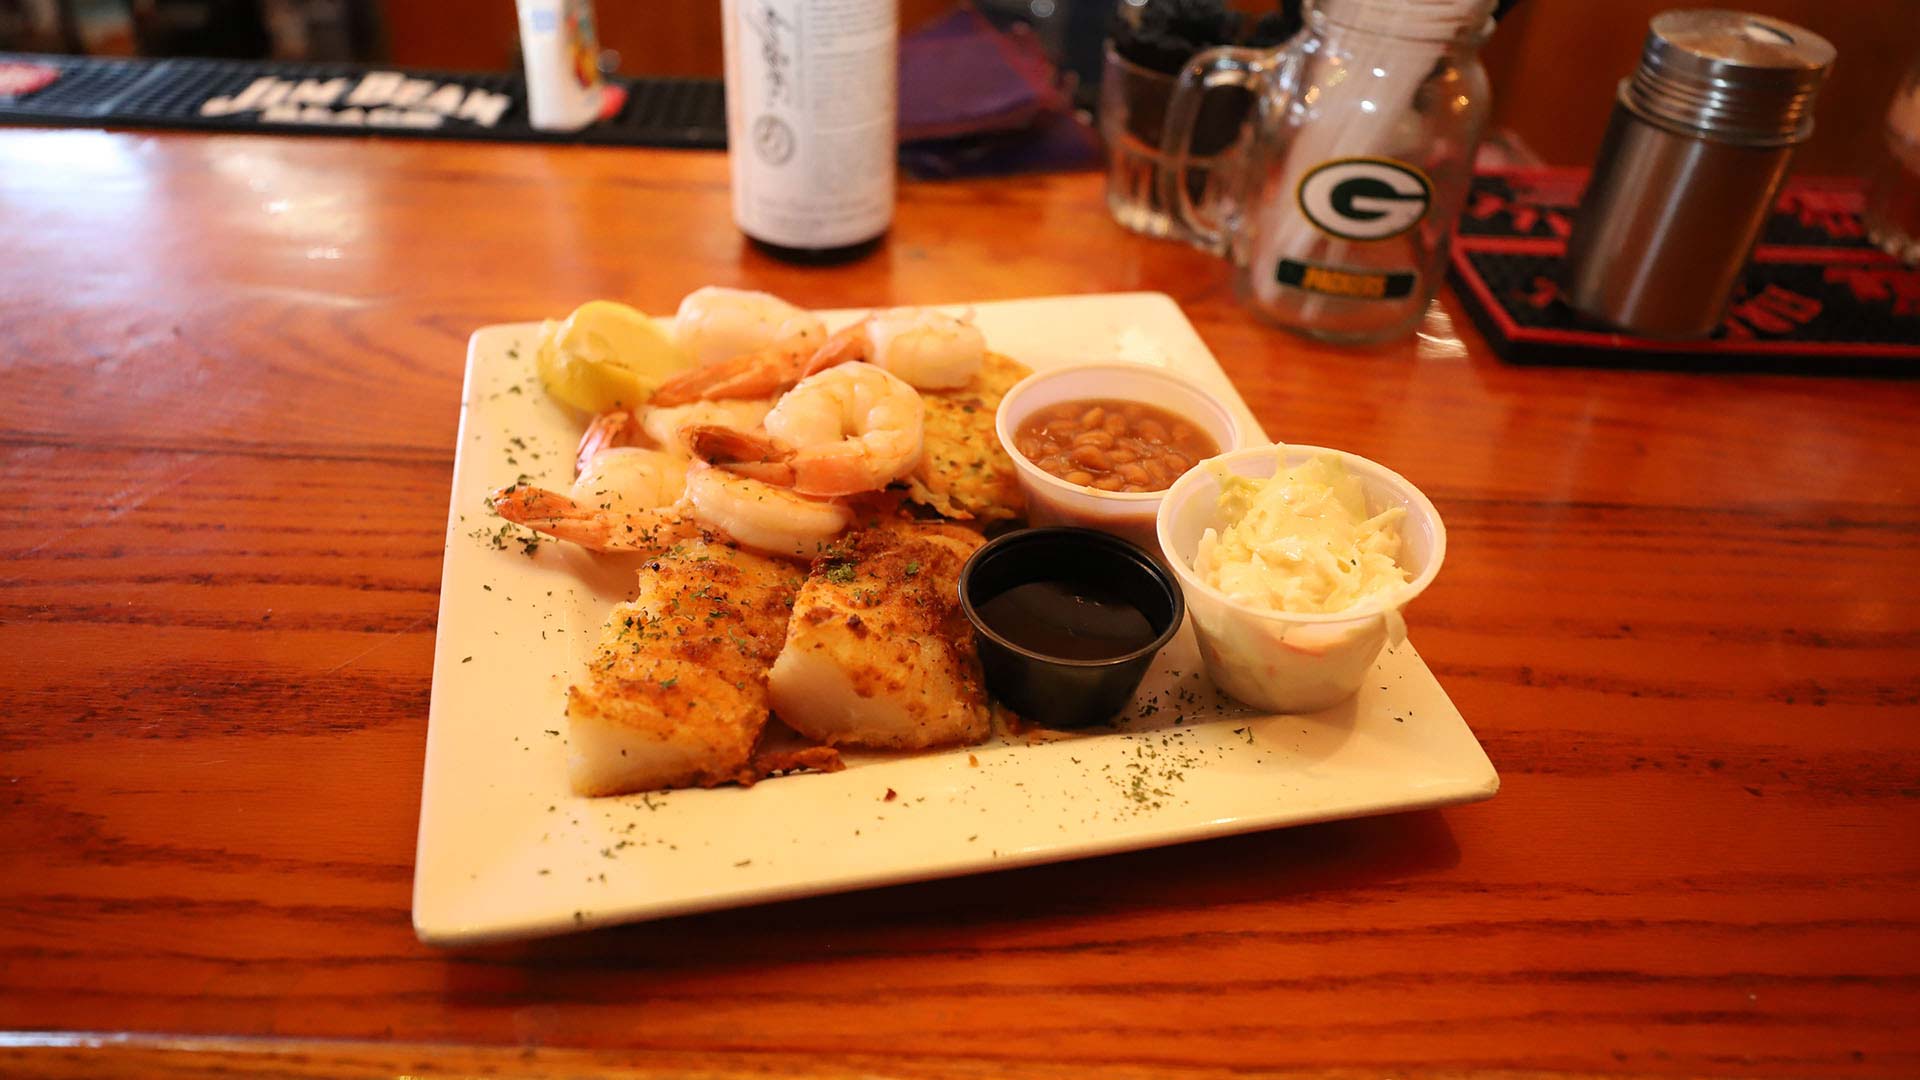 Fish and shrimp served on a plate